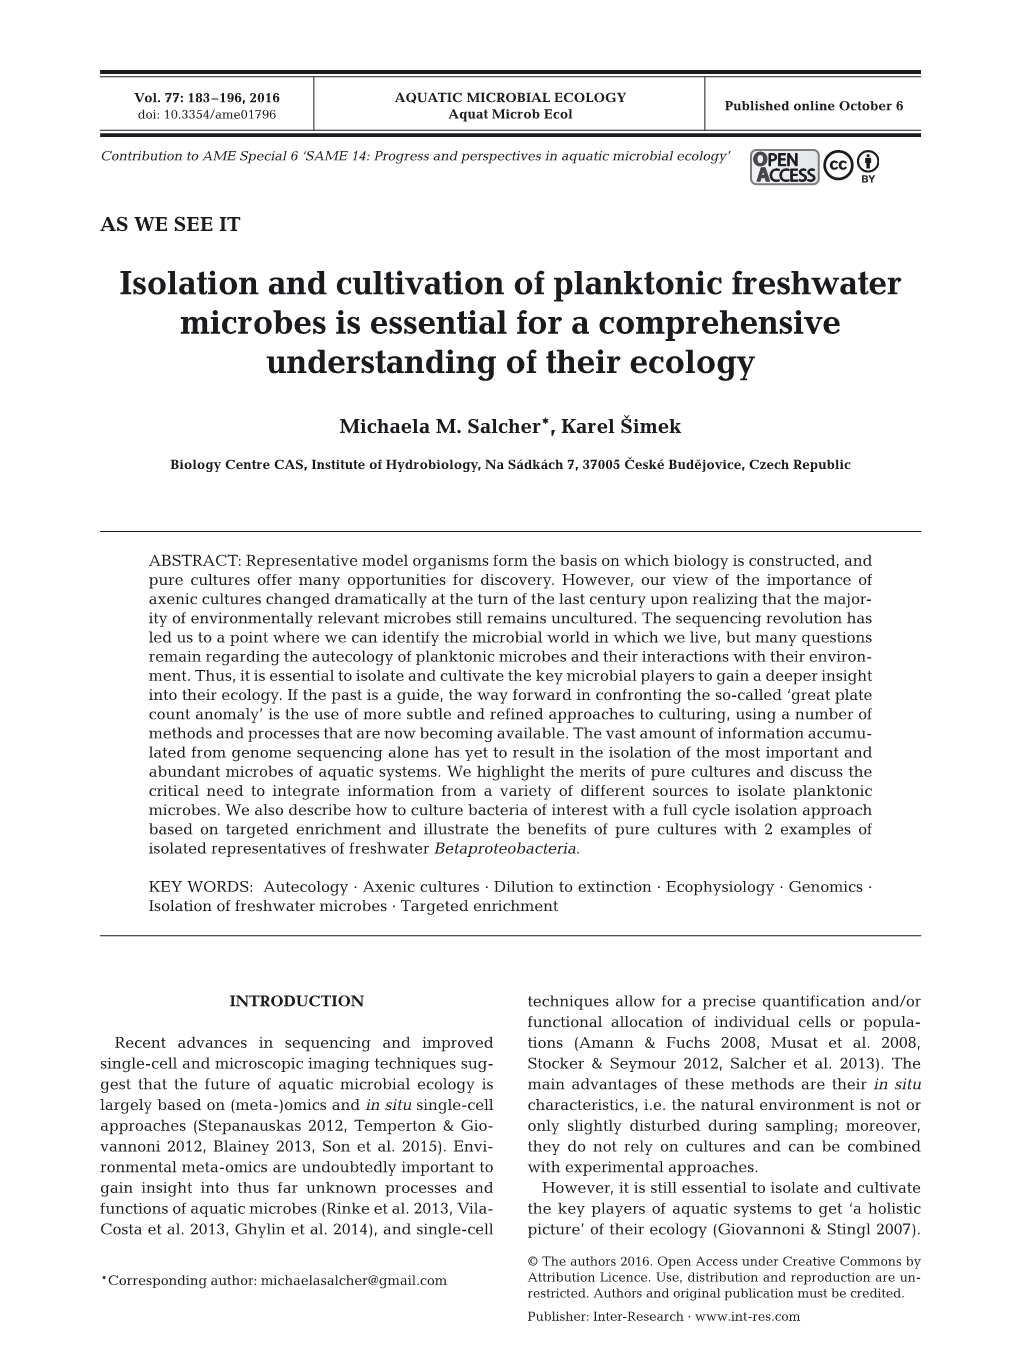 Isolation and Cultivation of Planktonic Freshwater Microbes Is Essential for a Comprehensive Understanding of Their Ecology